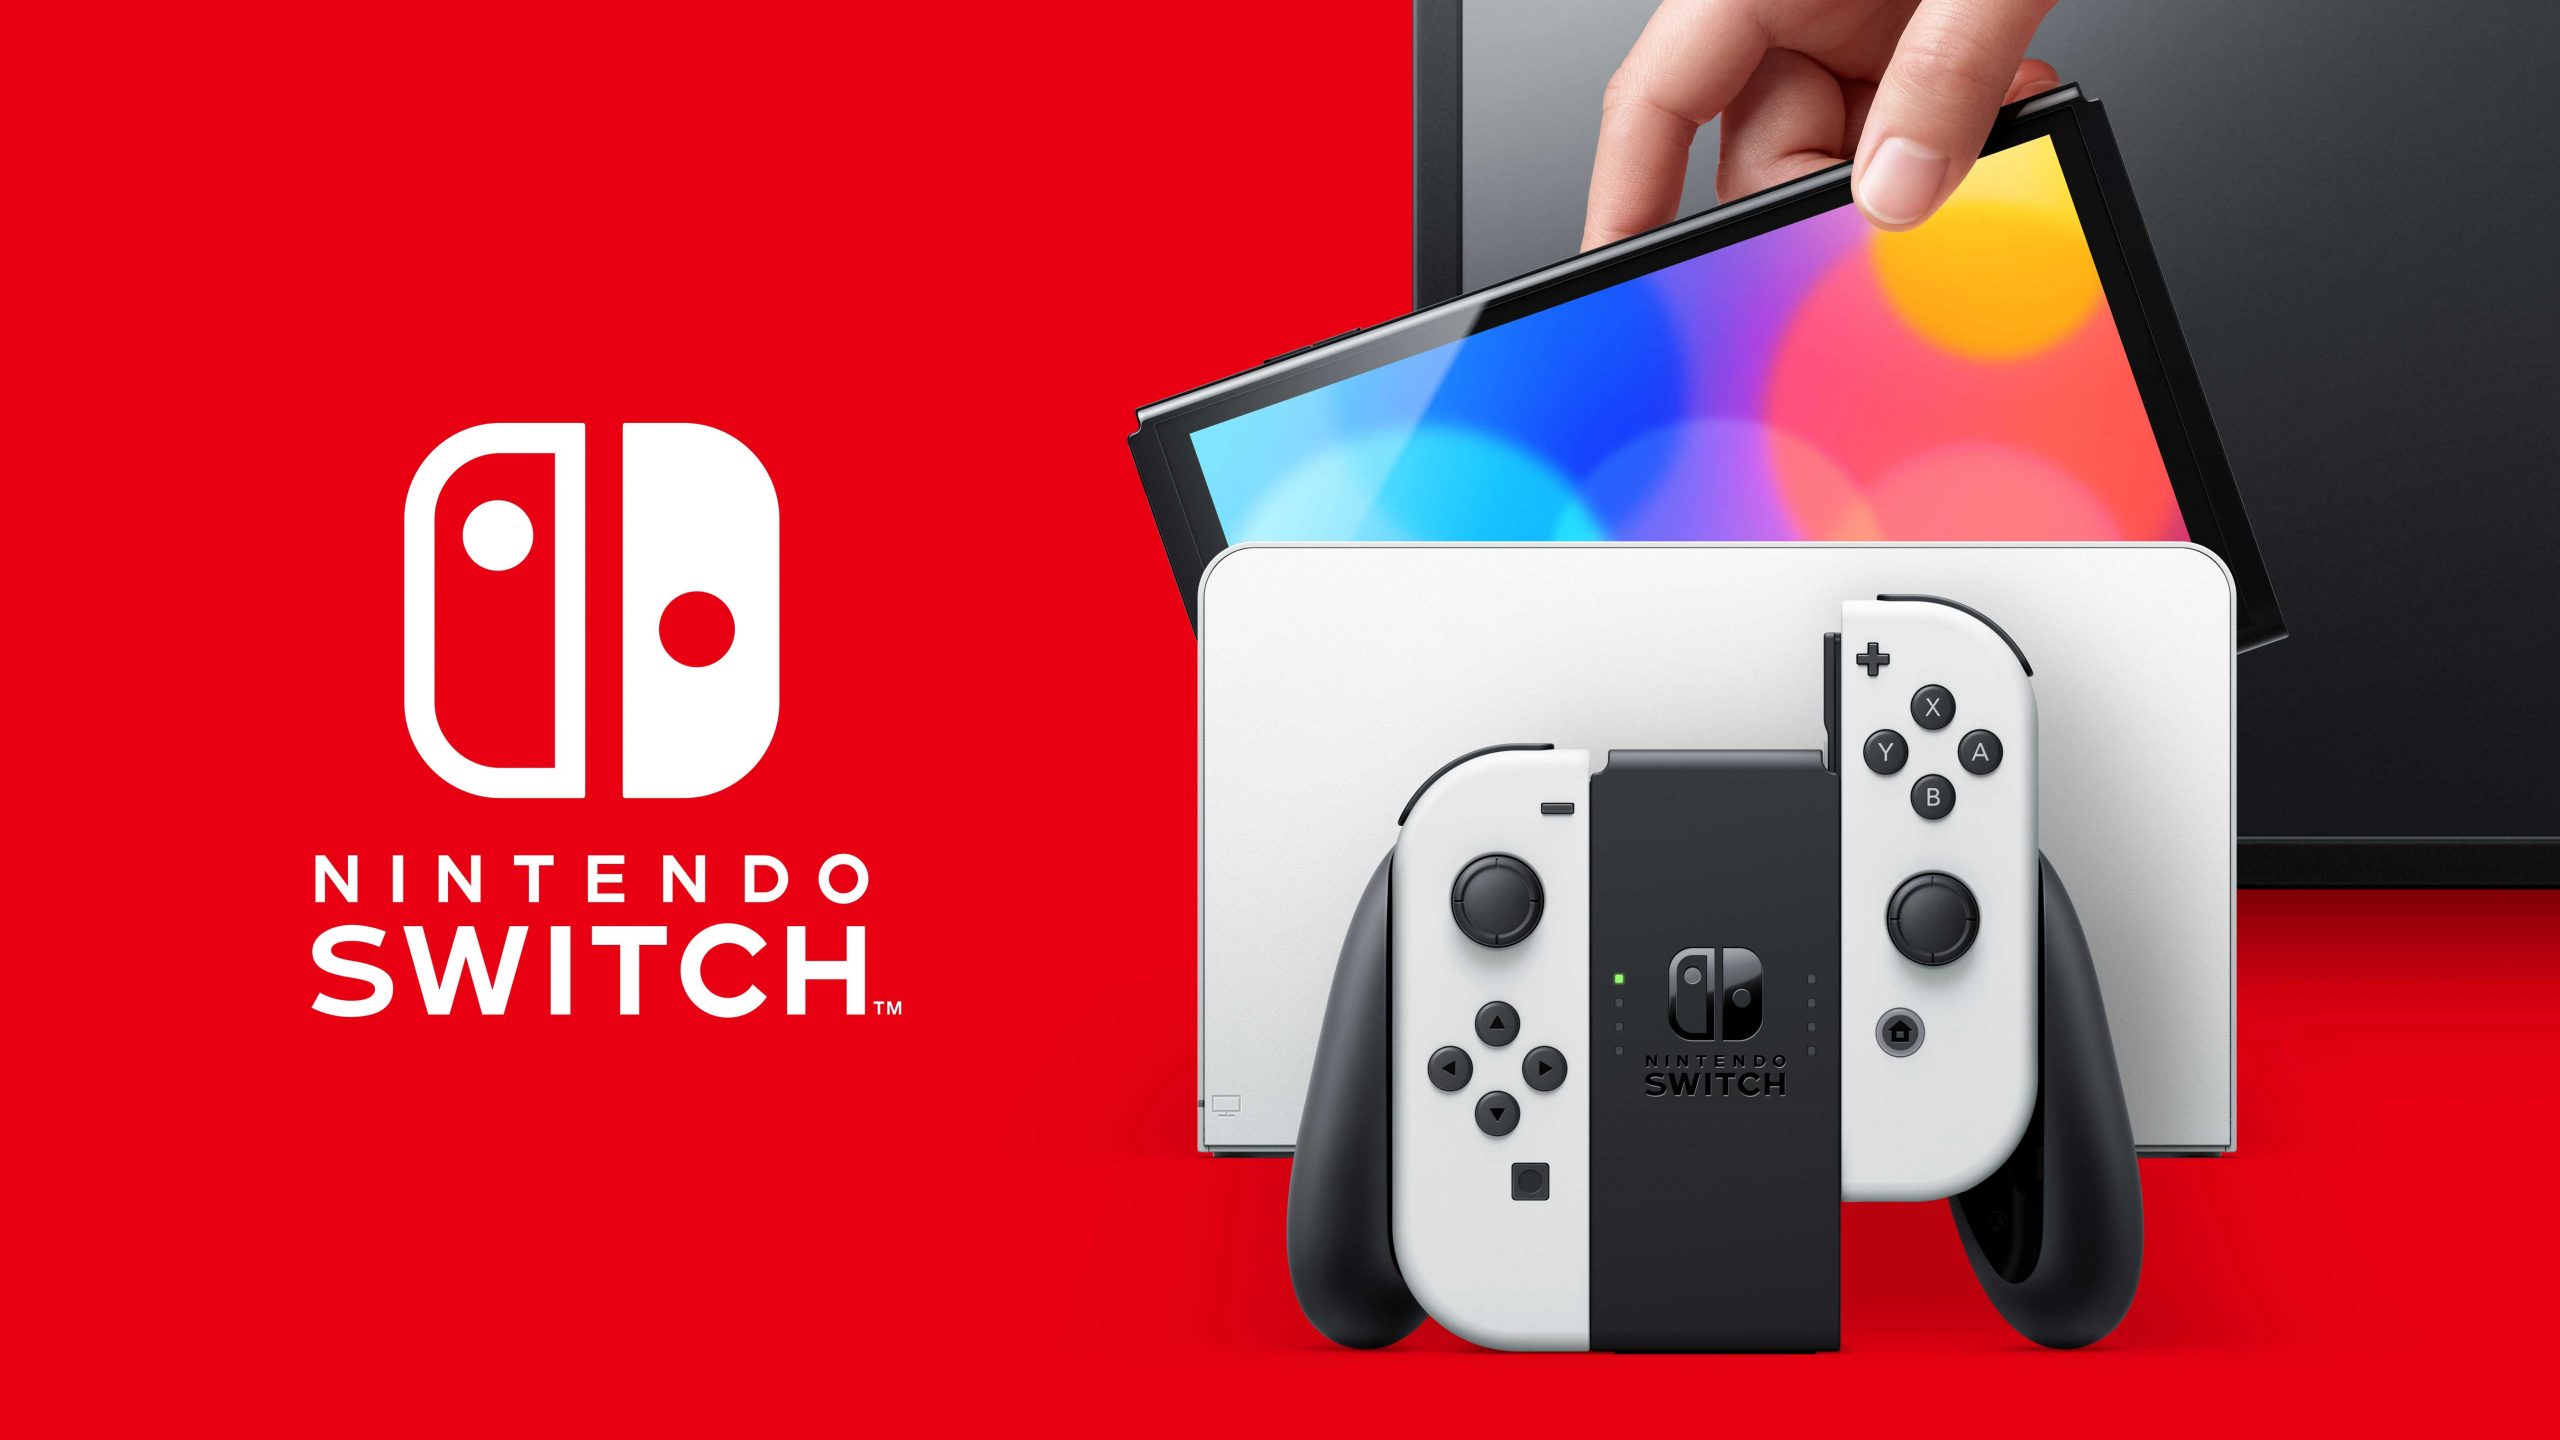 Nintendo Switch (OLED Model) announced for 8 October